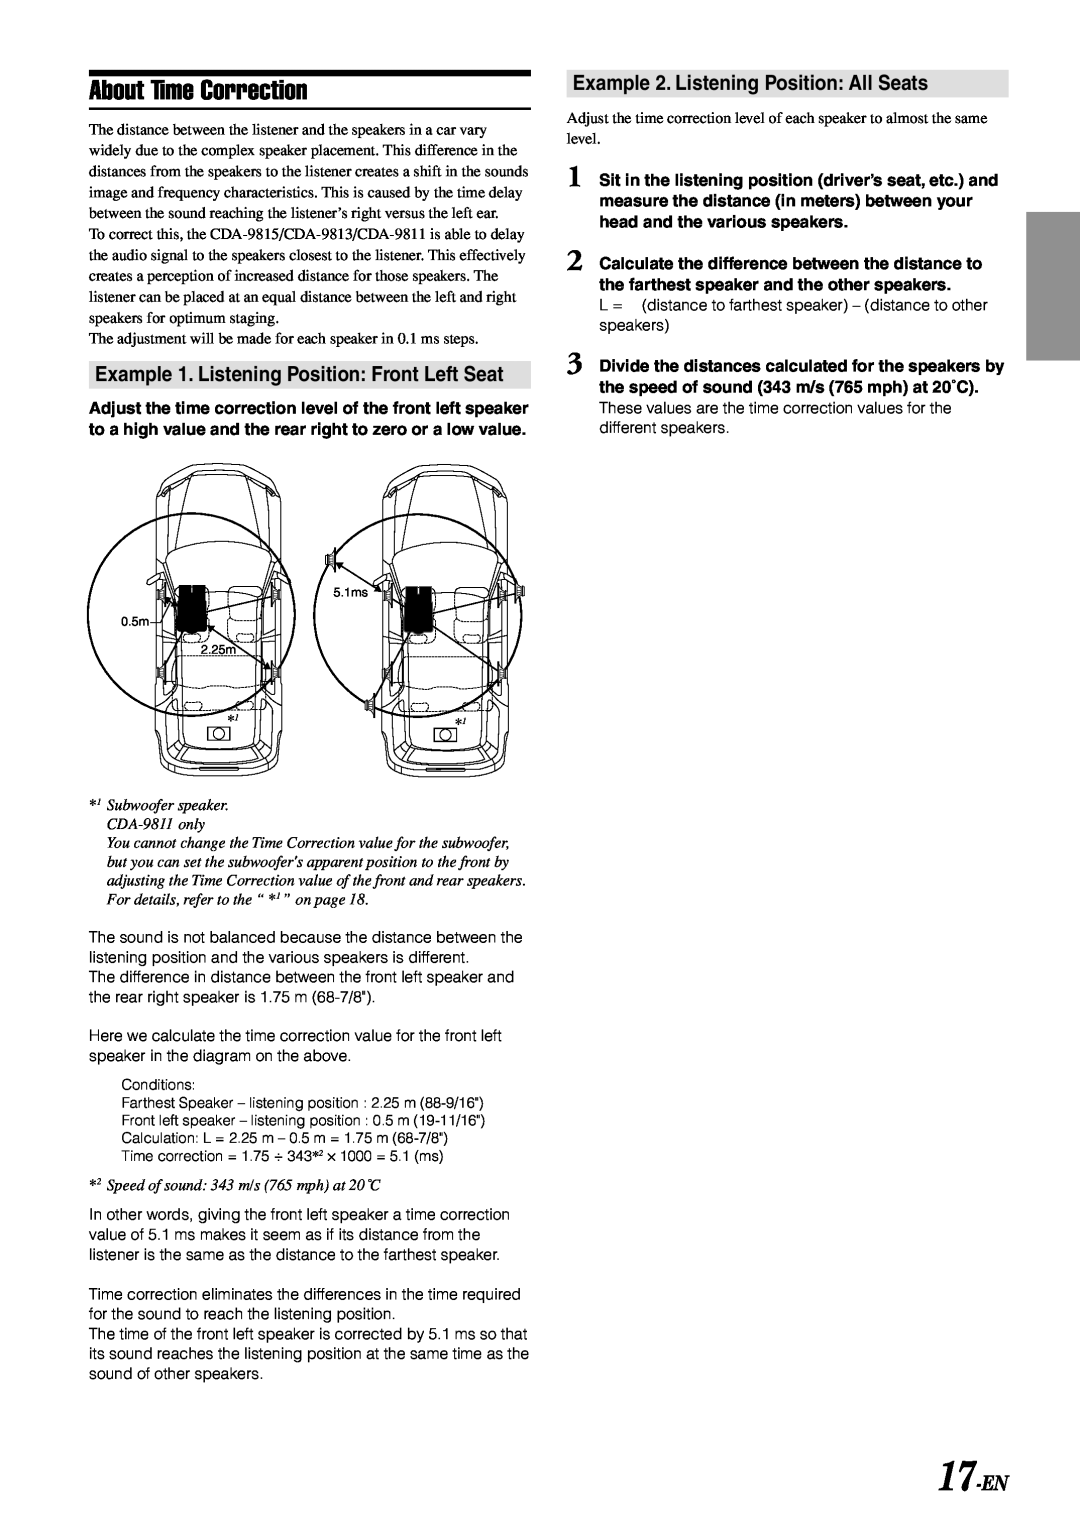 Alpine CDA-9811, CDA-9813, CDA-9815 owner manual About Time Correction, Example 1. Listening Position Front Left Seat, 17-EN 